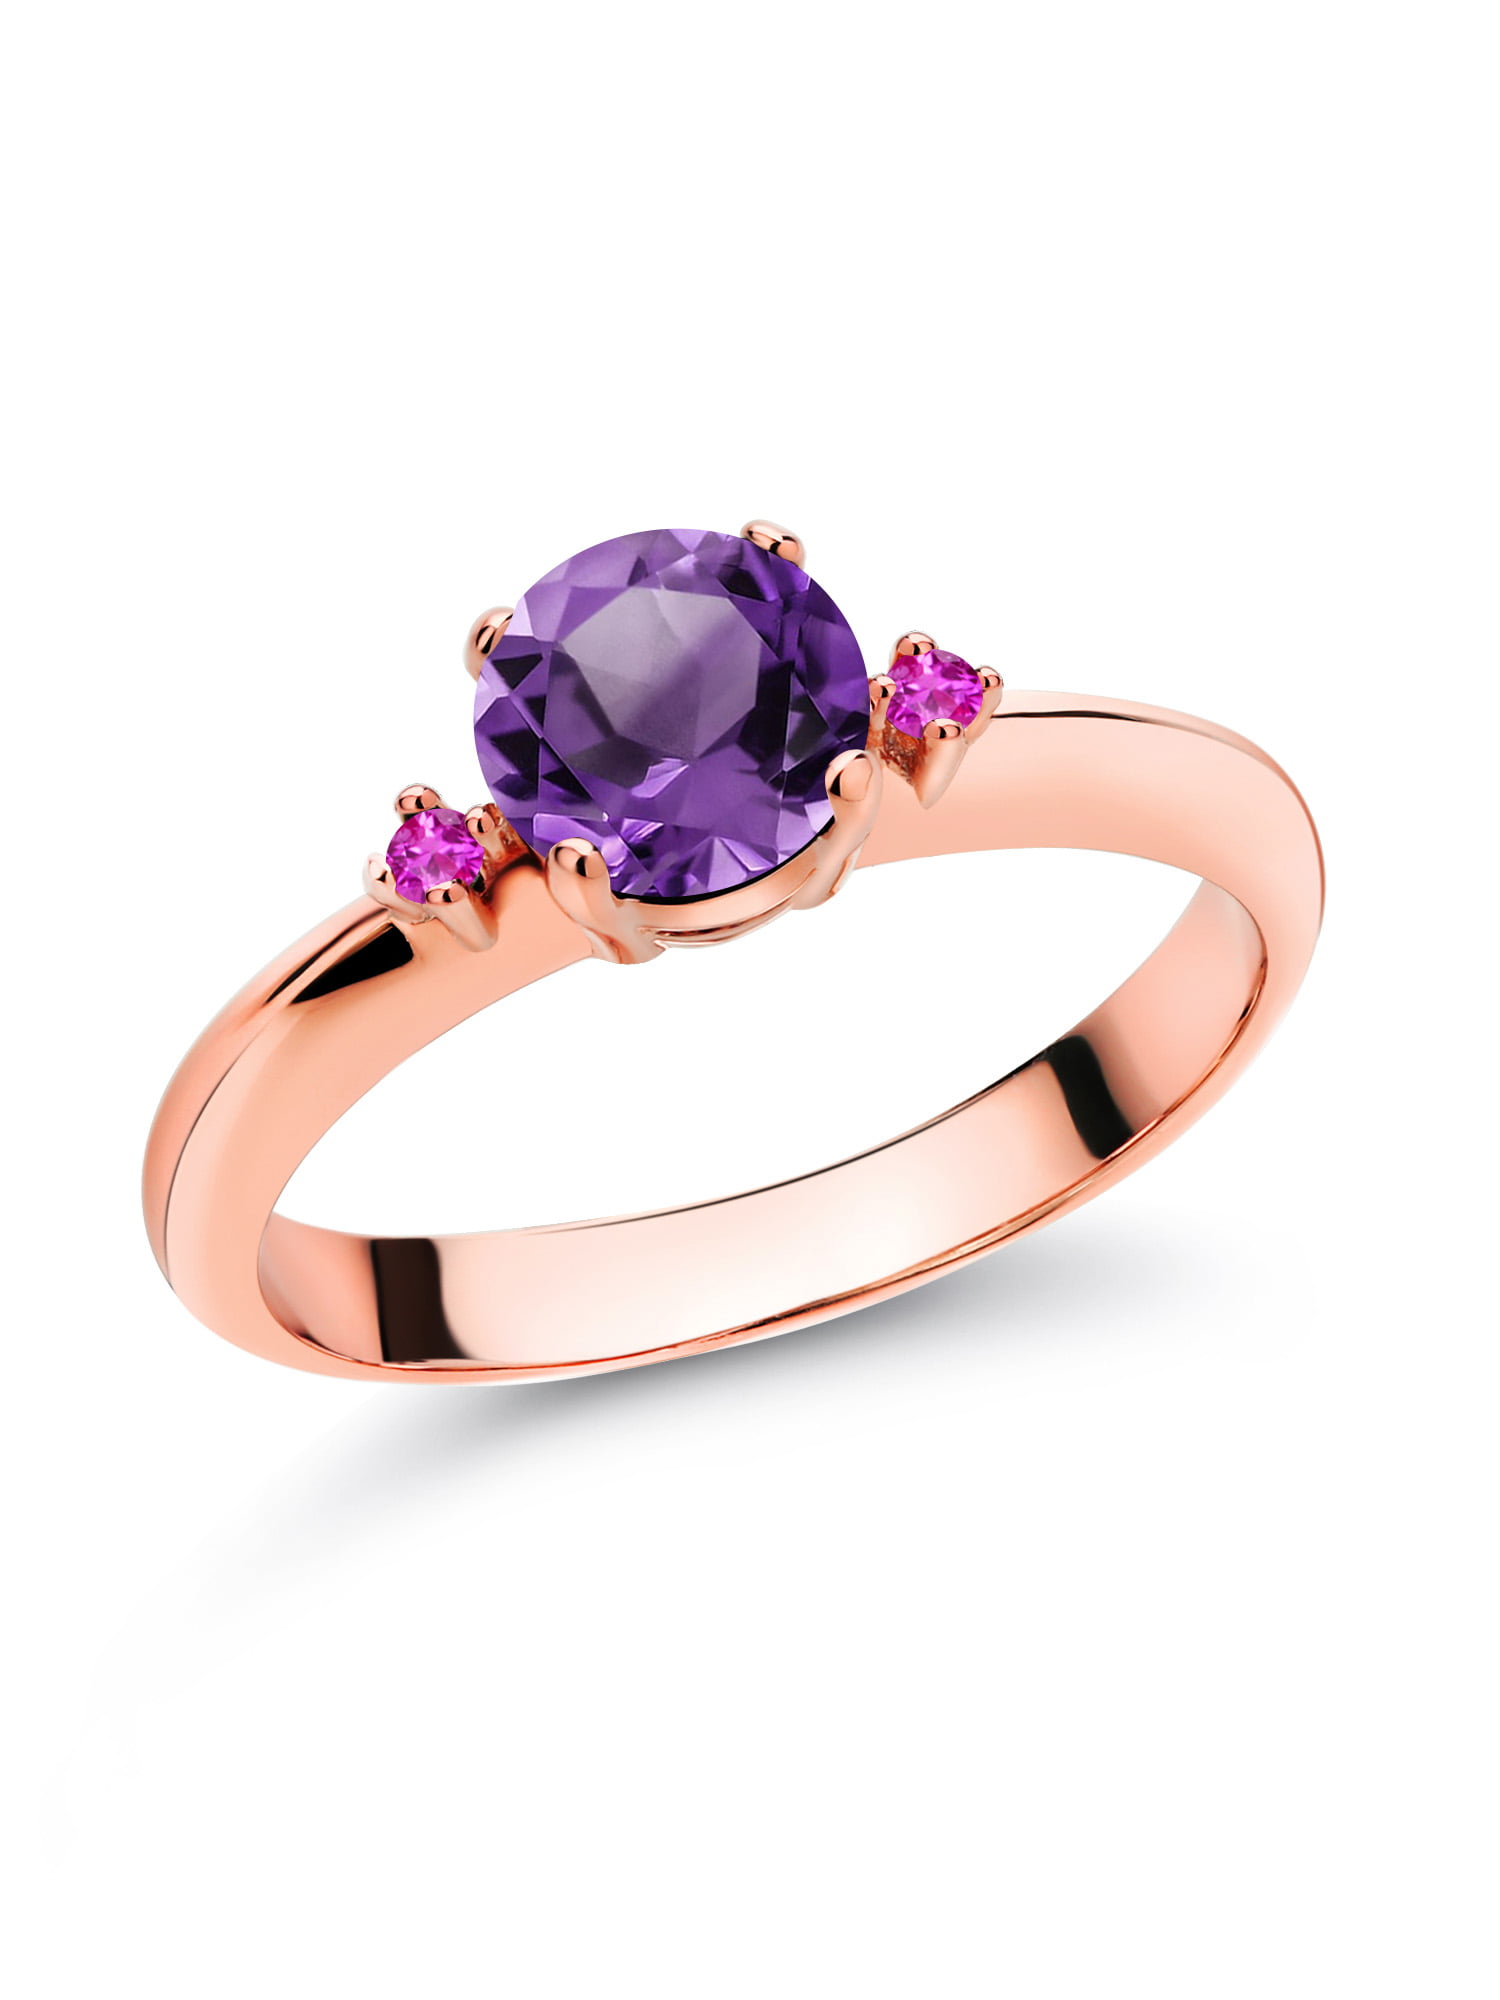 Gem Stone King 925 Sterling Silver 0.48 Ct Round Purple Amethyst 3-Stone Ring